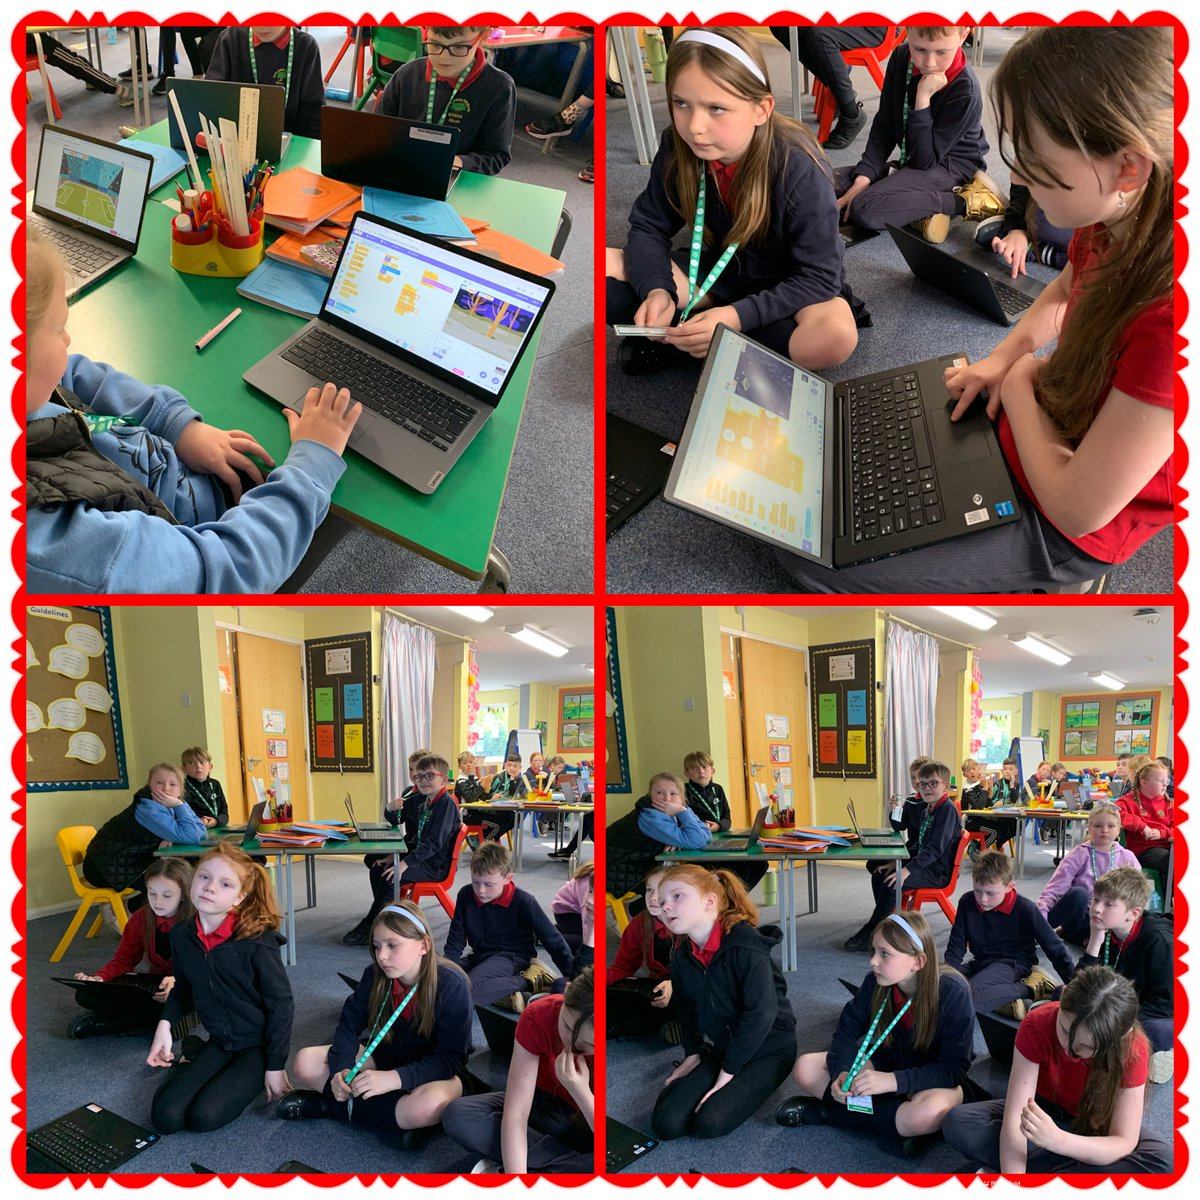 Lots of fun in Dosbarth Helyg today learning to make a game with Sarah @codeclubWales #AmbitiousAlys